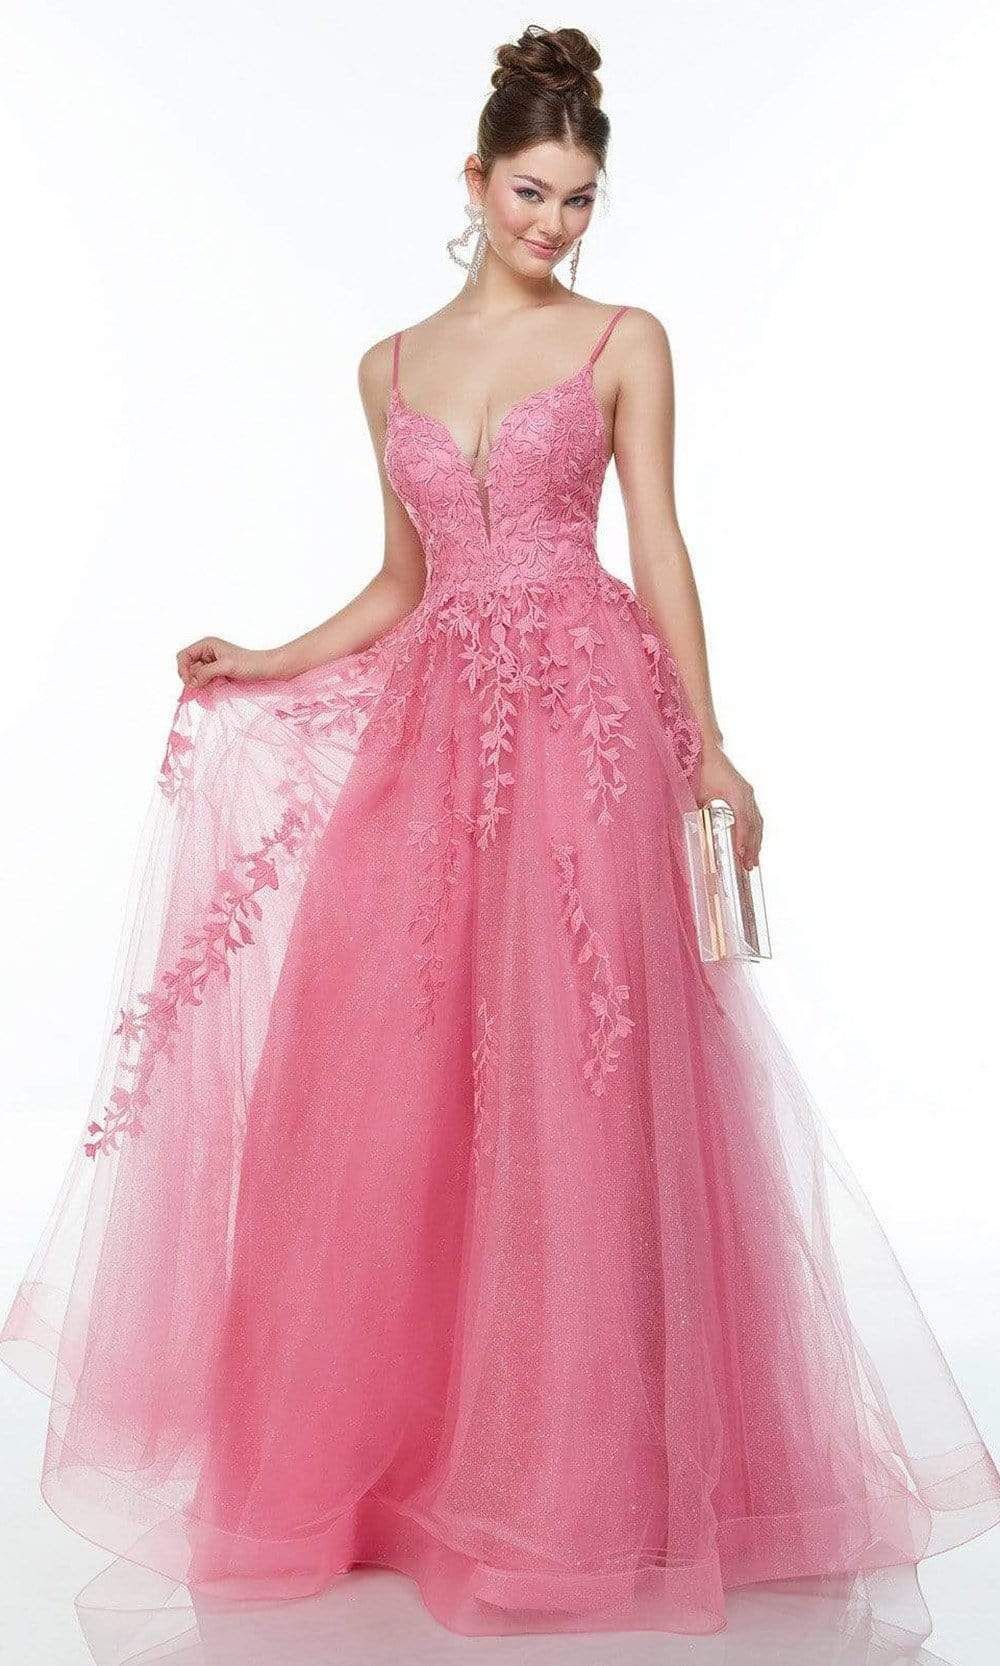 Alyce Paris - 61087 Sleeveless Embroidered Tulle Dress Prom Dresses